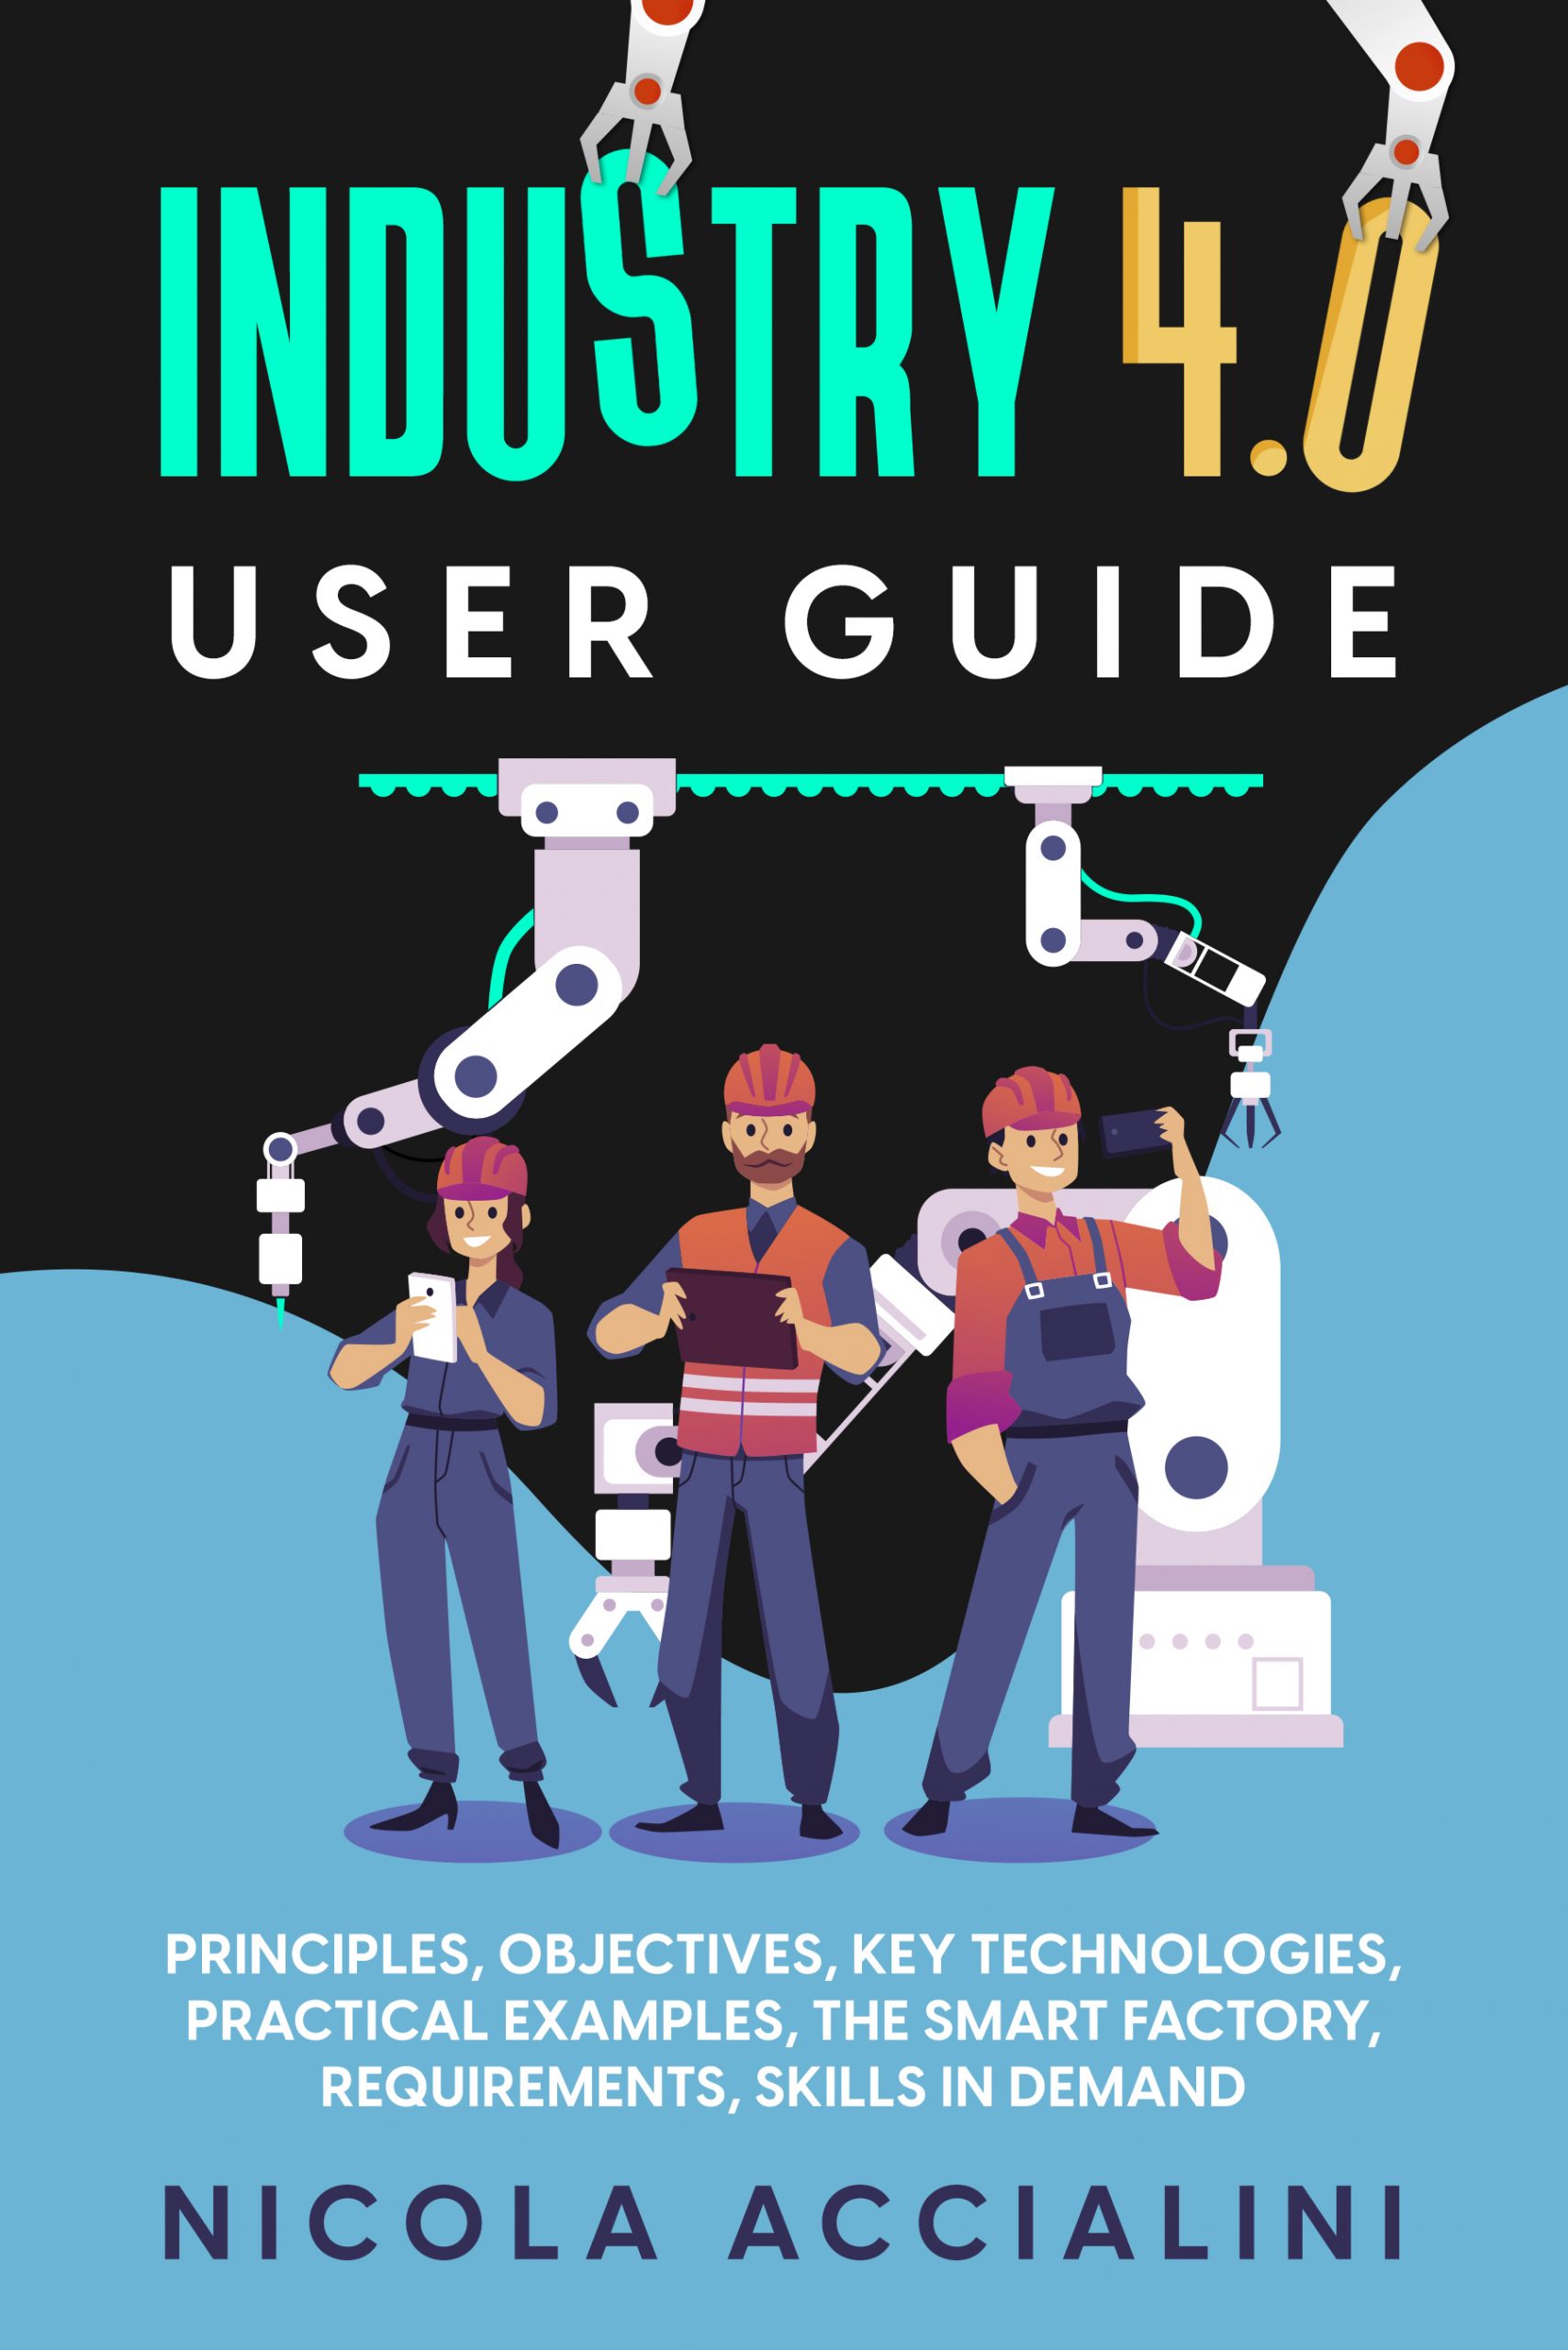 industry 4.0 user guide